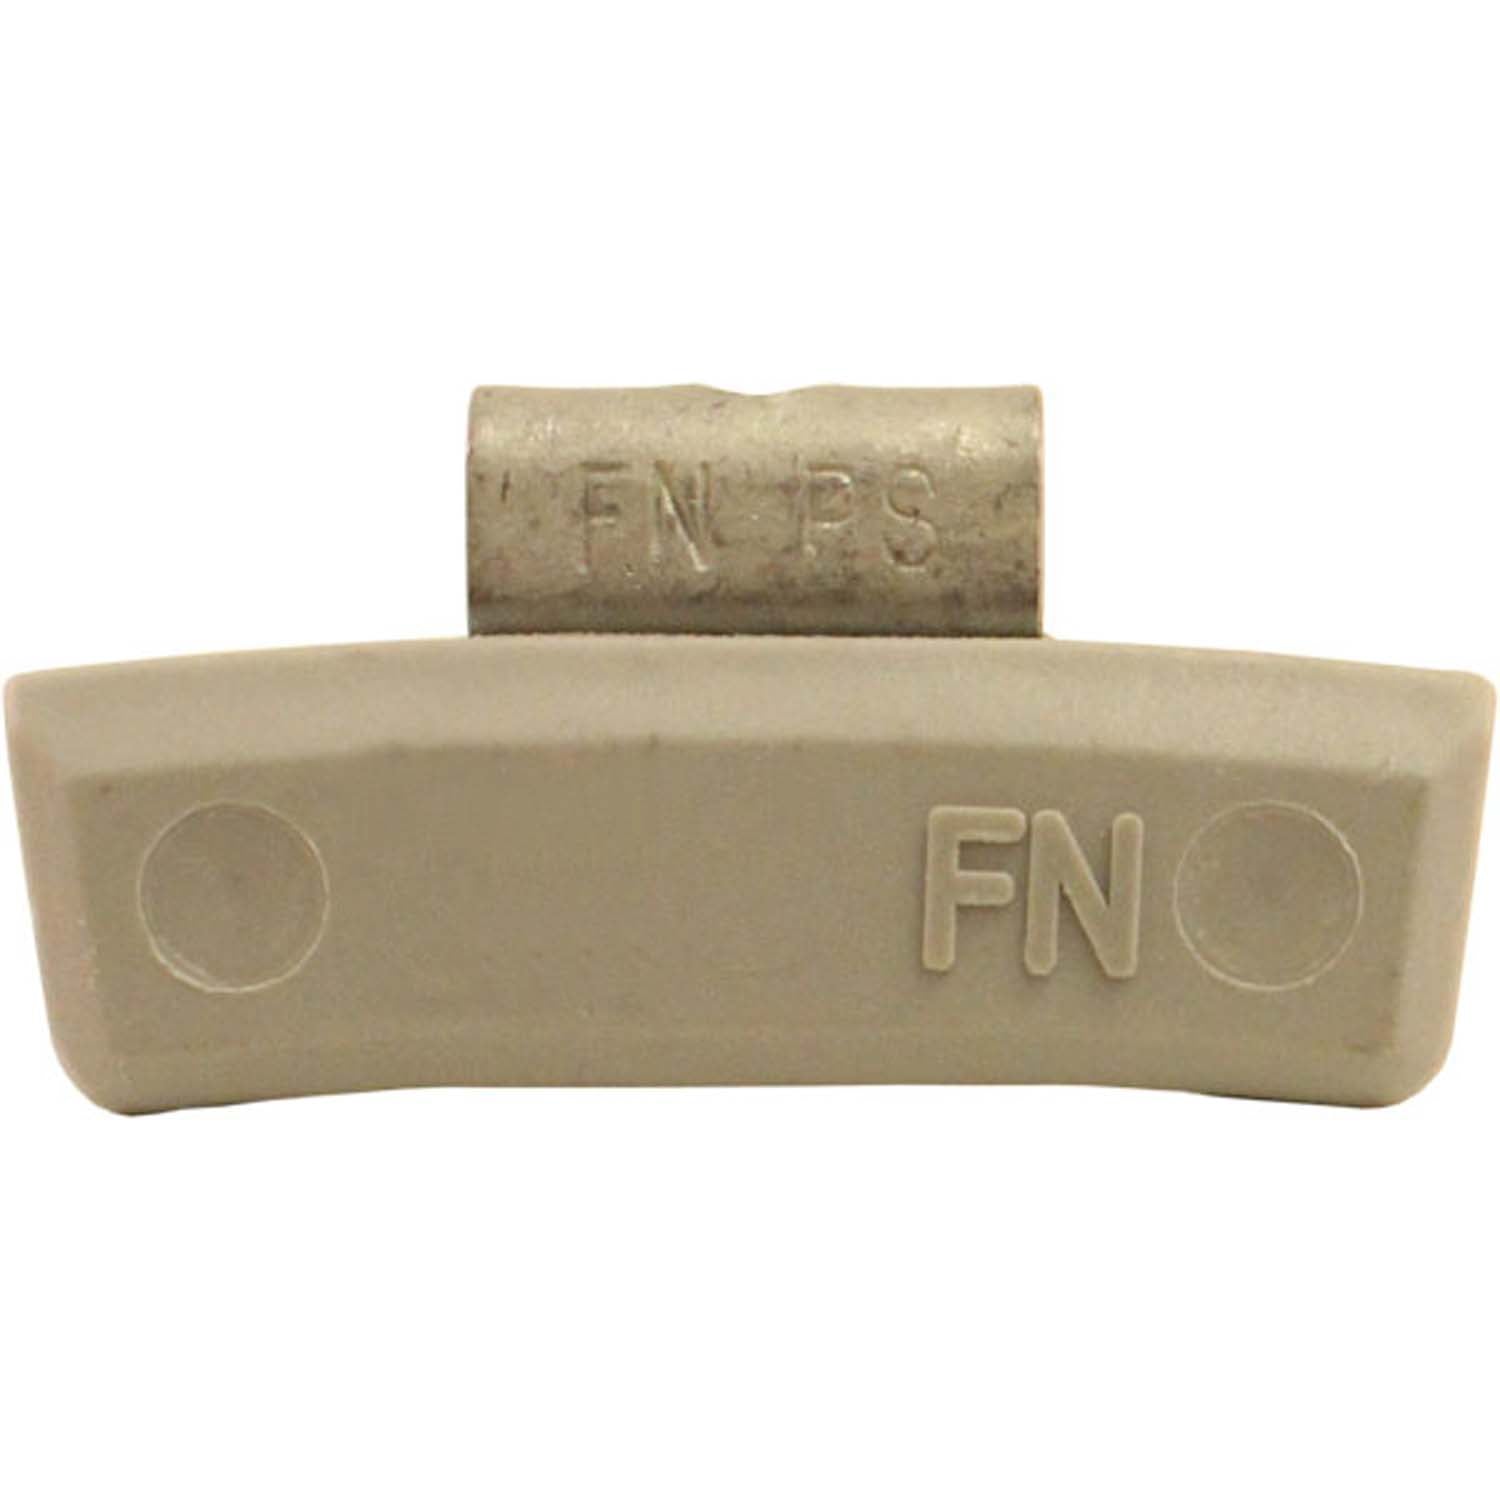 Plombco FNPS020 Plasteel Clip-On Wheel Weight 20gm - Box of 25